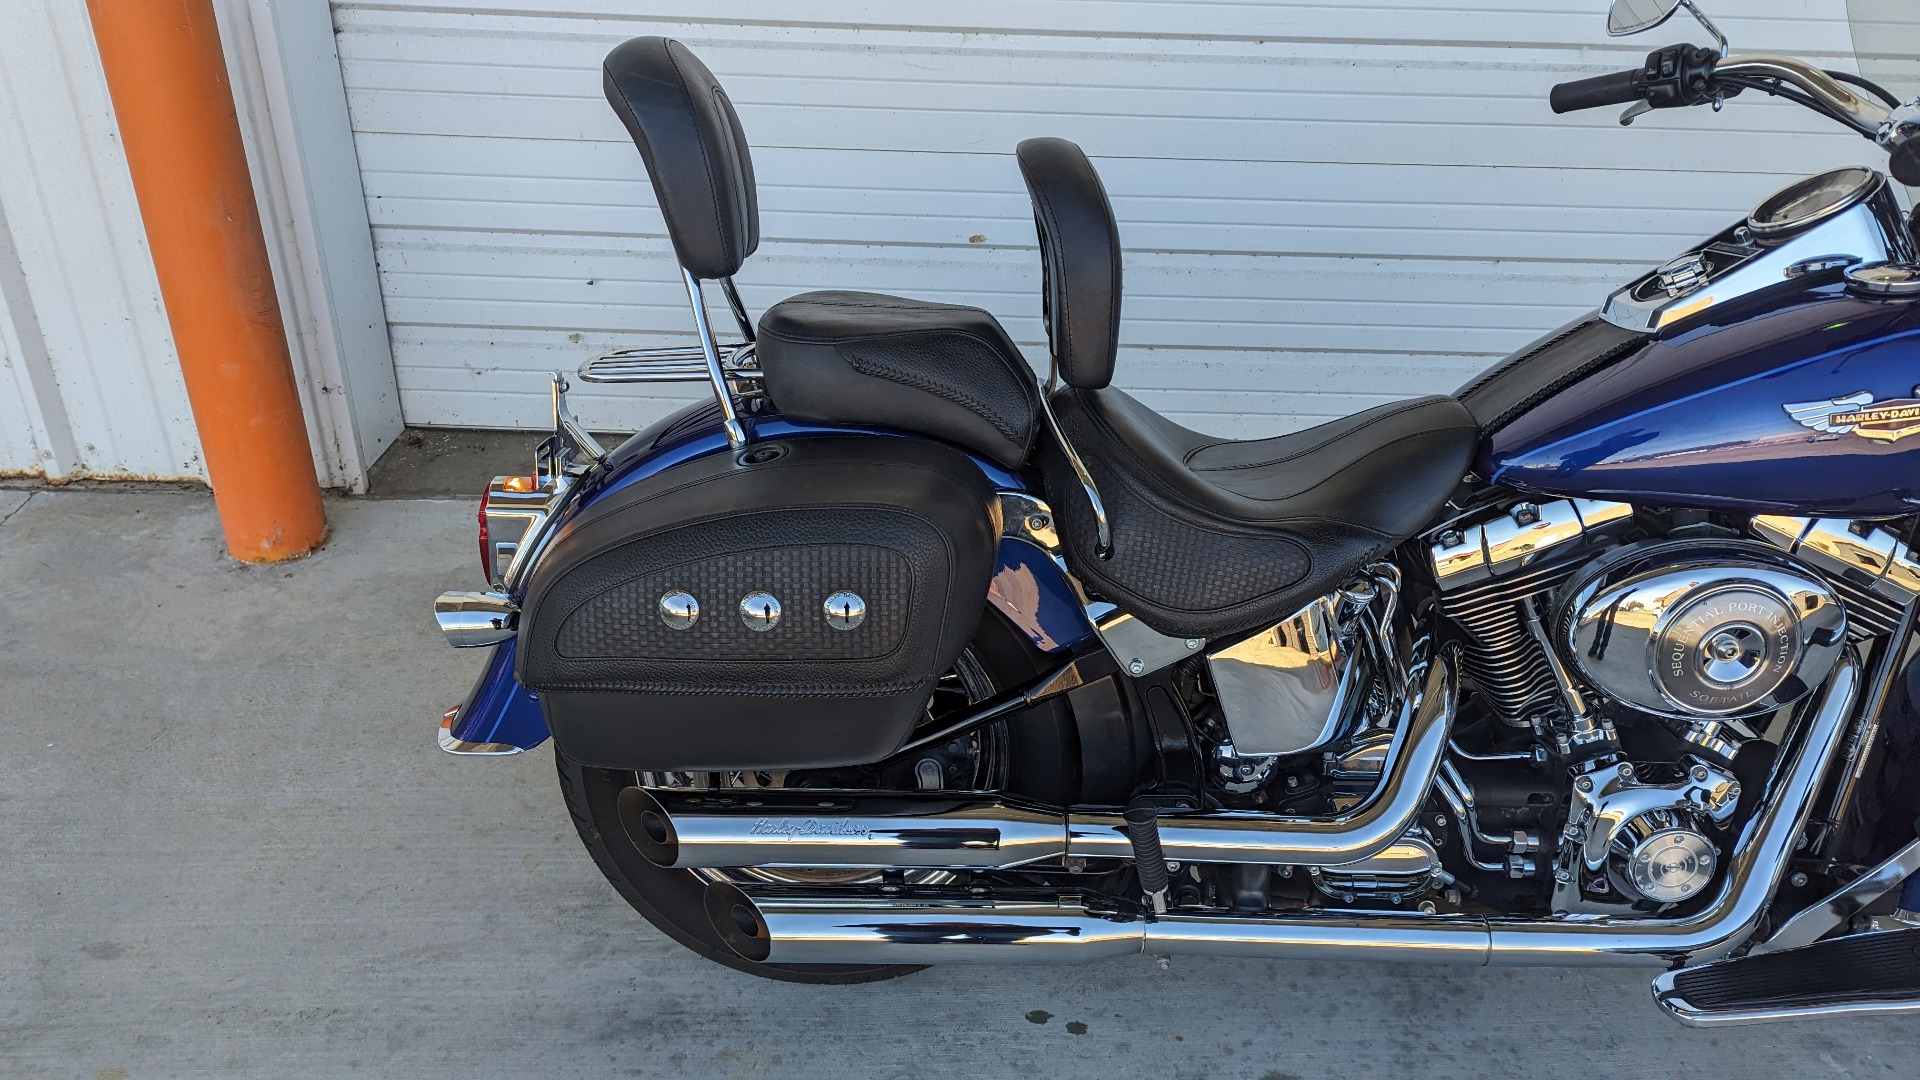 2006 harley davidson deluxe for sale in little rock - Photo 5